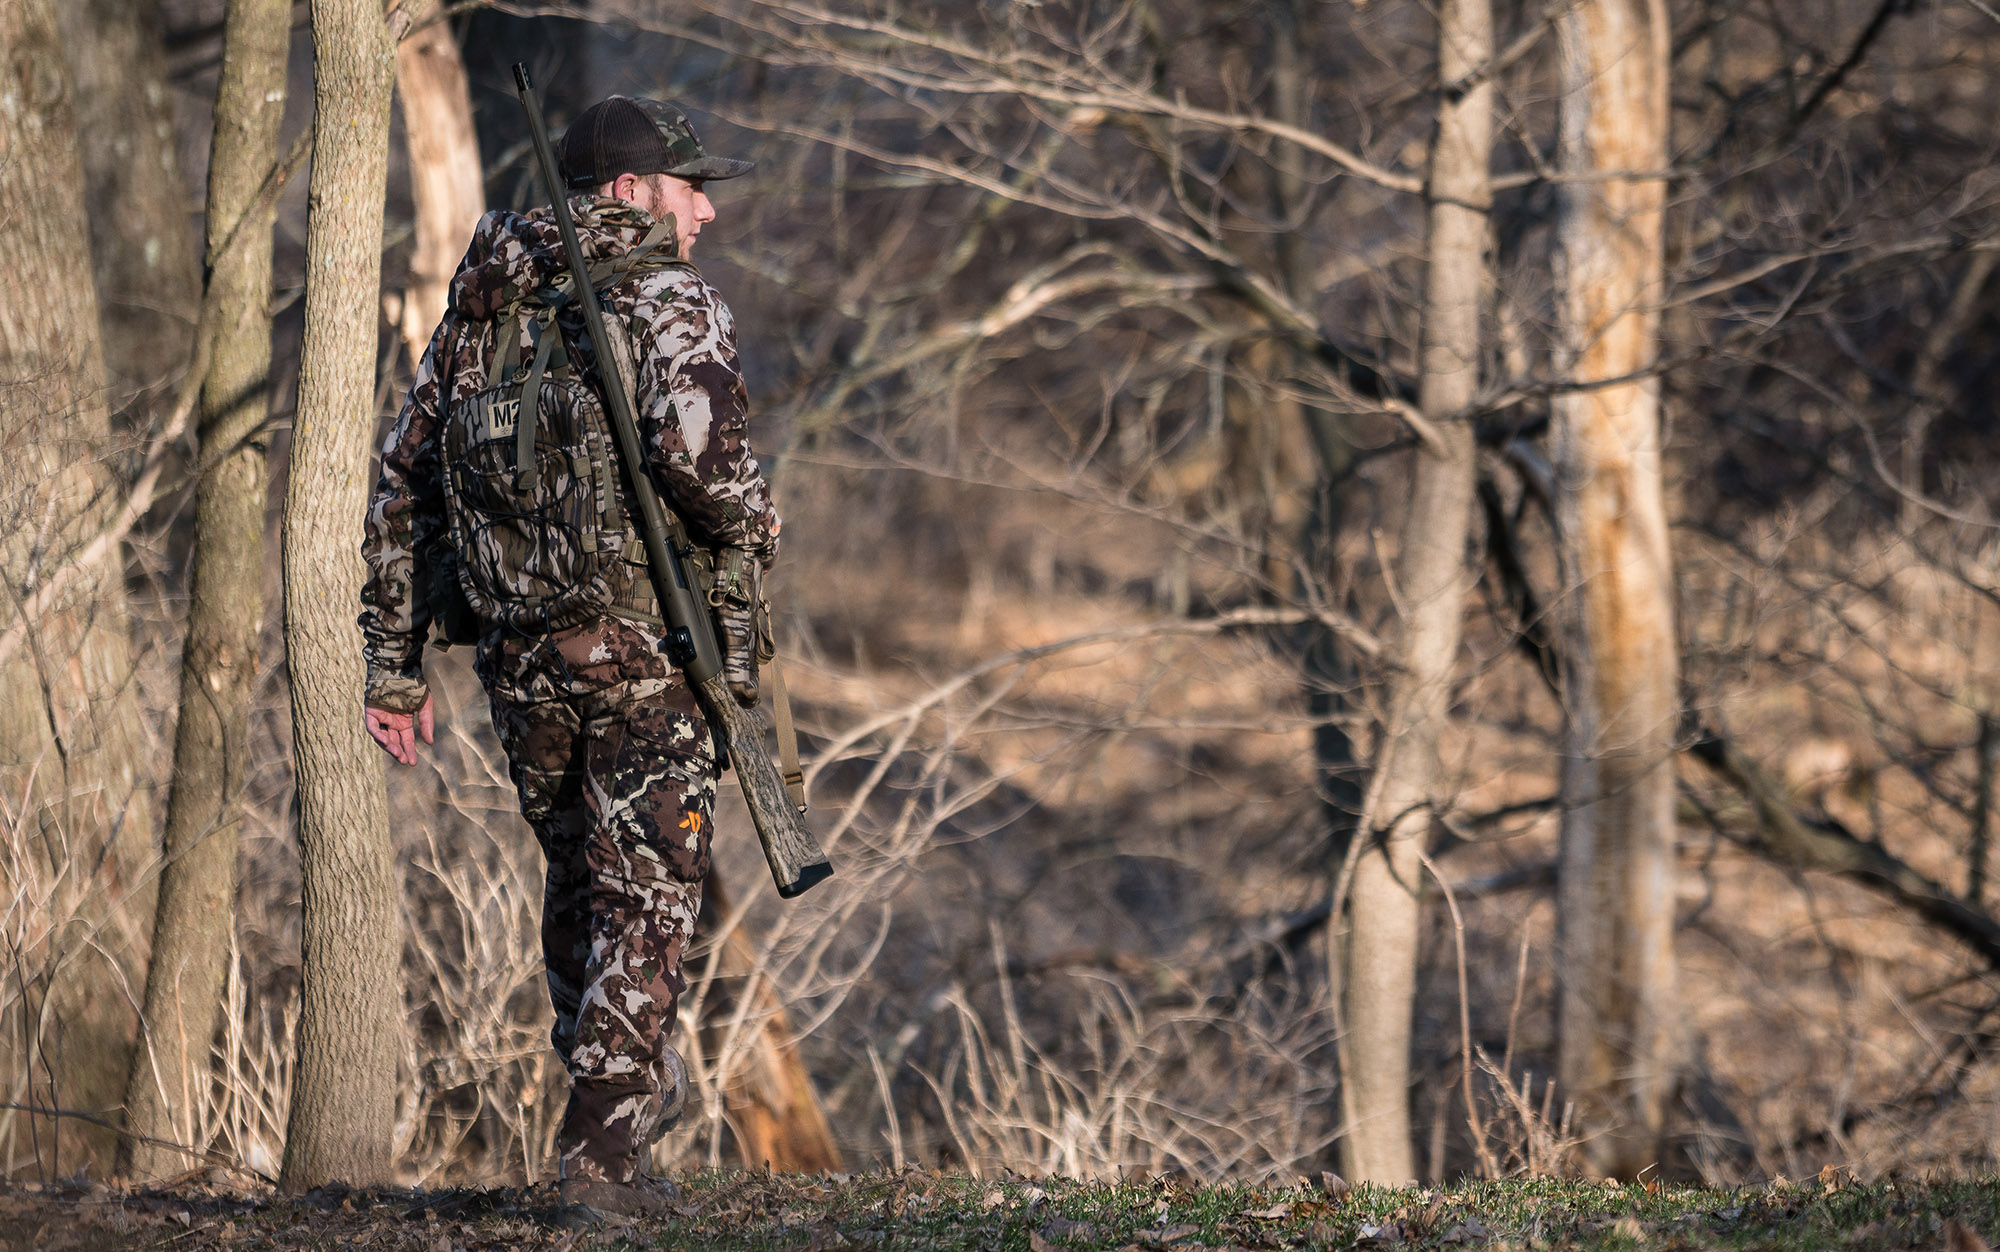 The Tethrd M2 Turkey Vest Hydra Pack acts as a day pack for water, gear, snacks, and essentials.